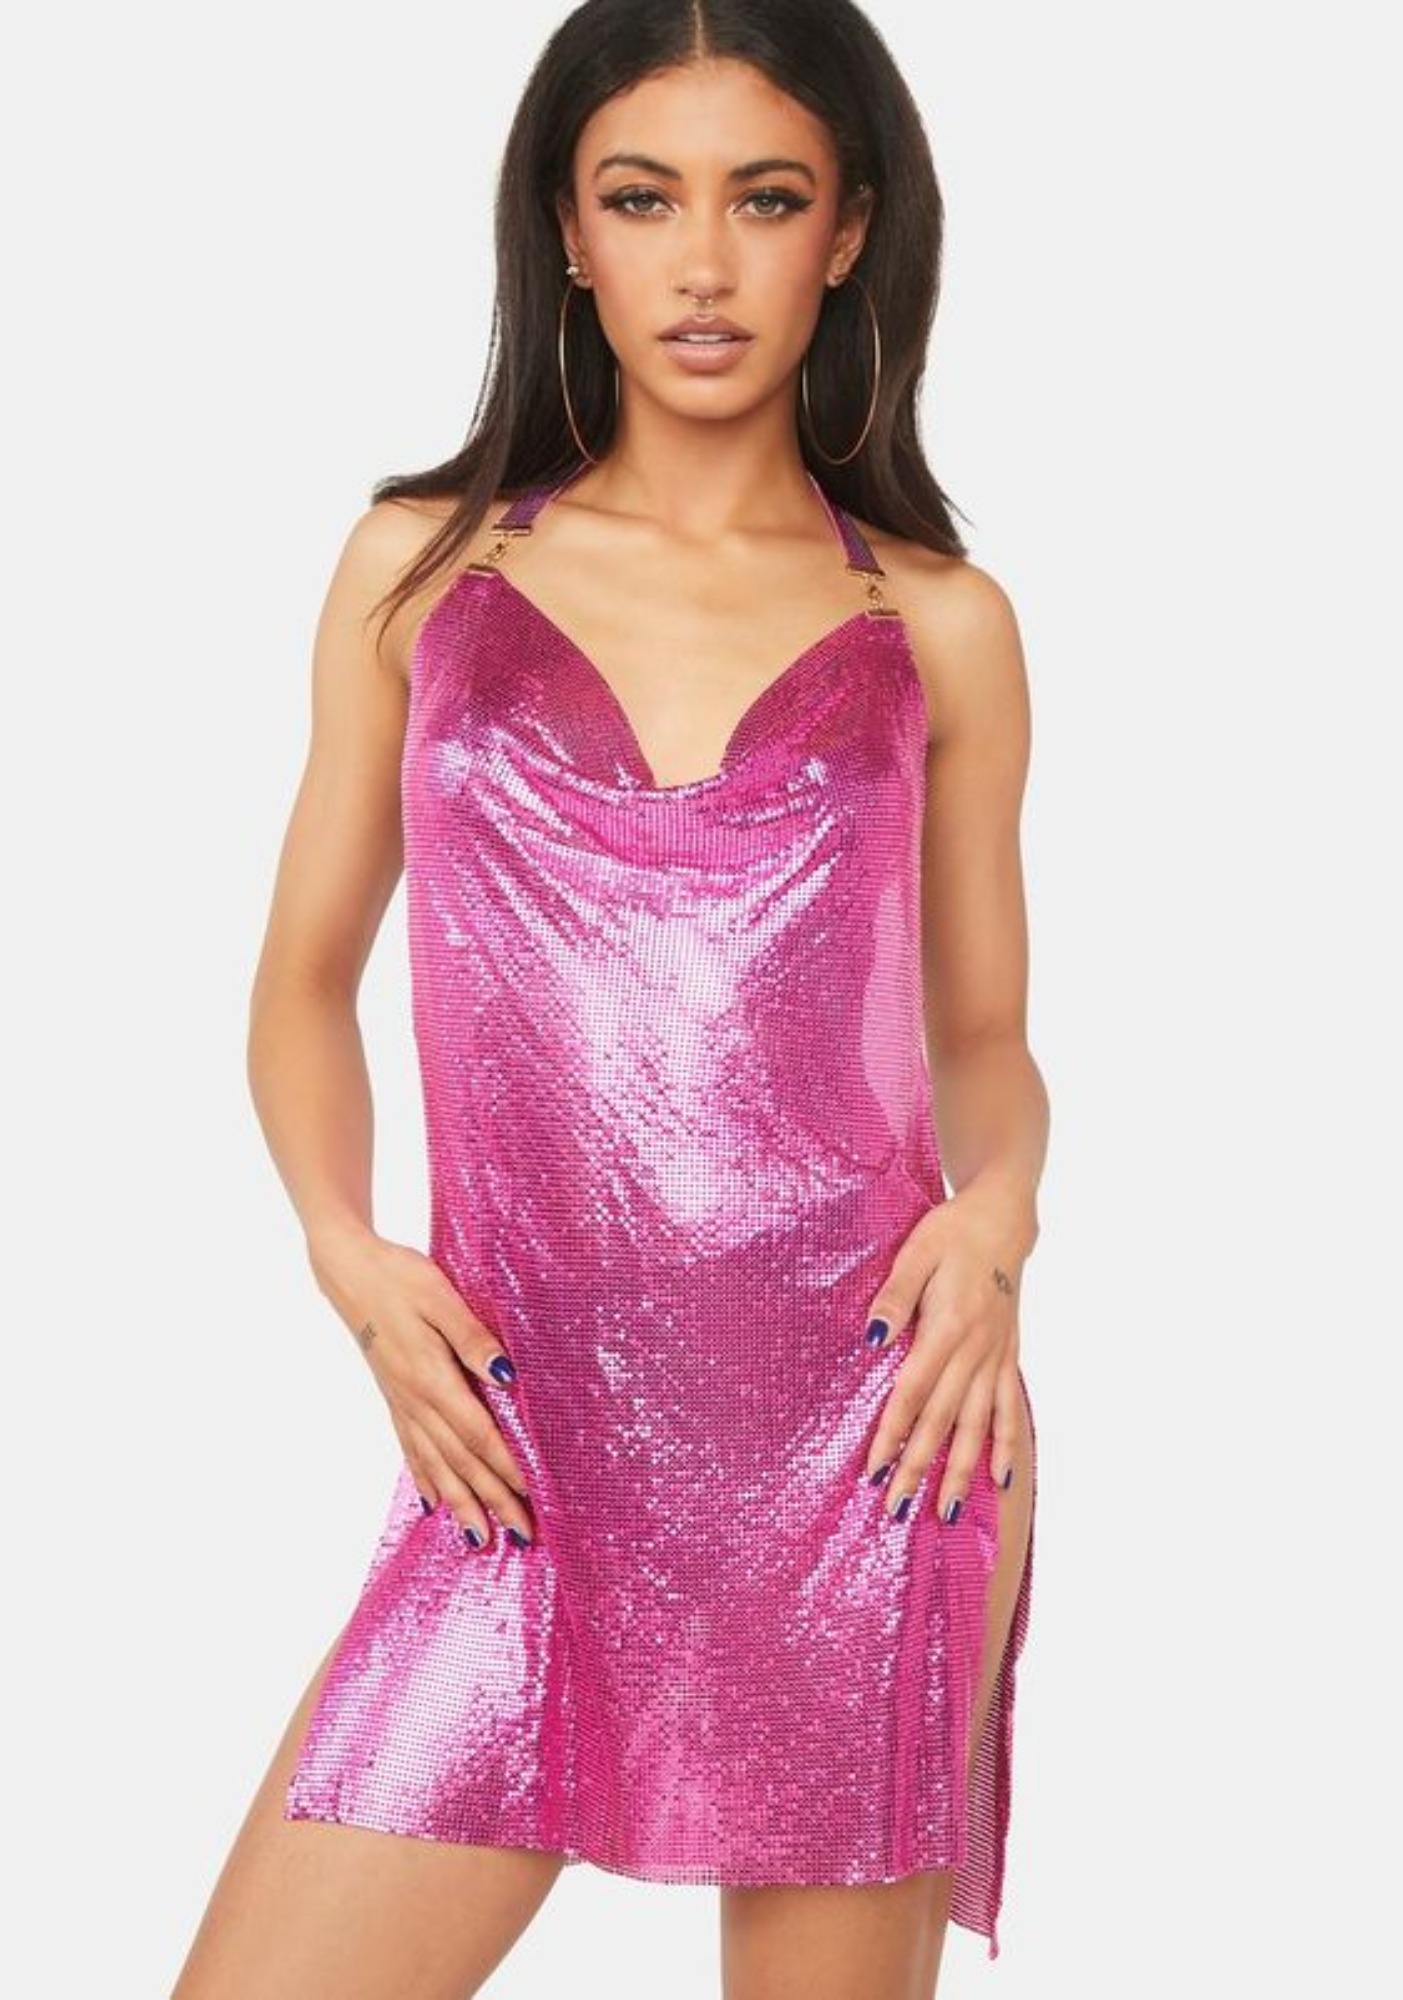 hot pink chainmail dress for bachelorette